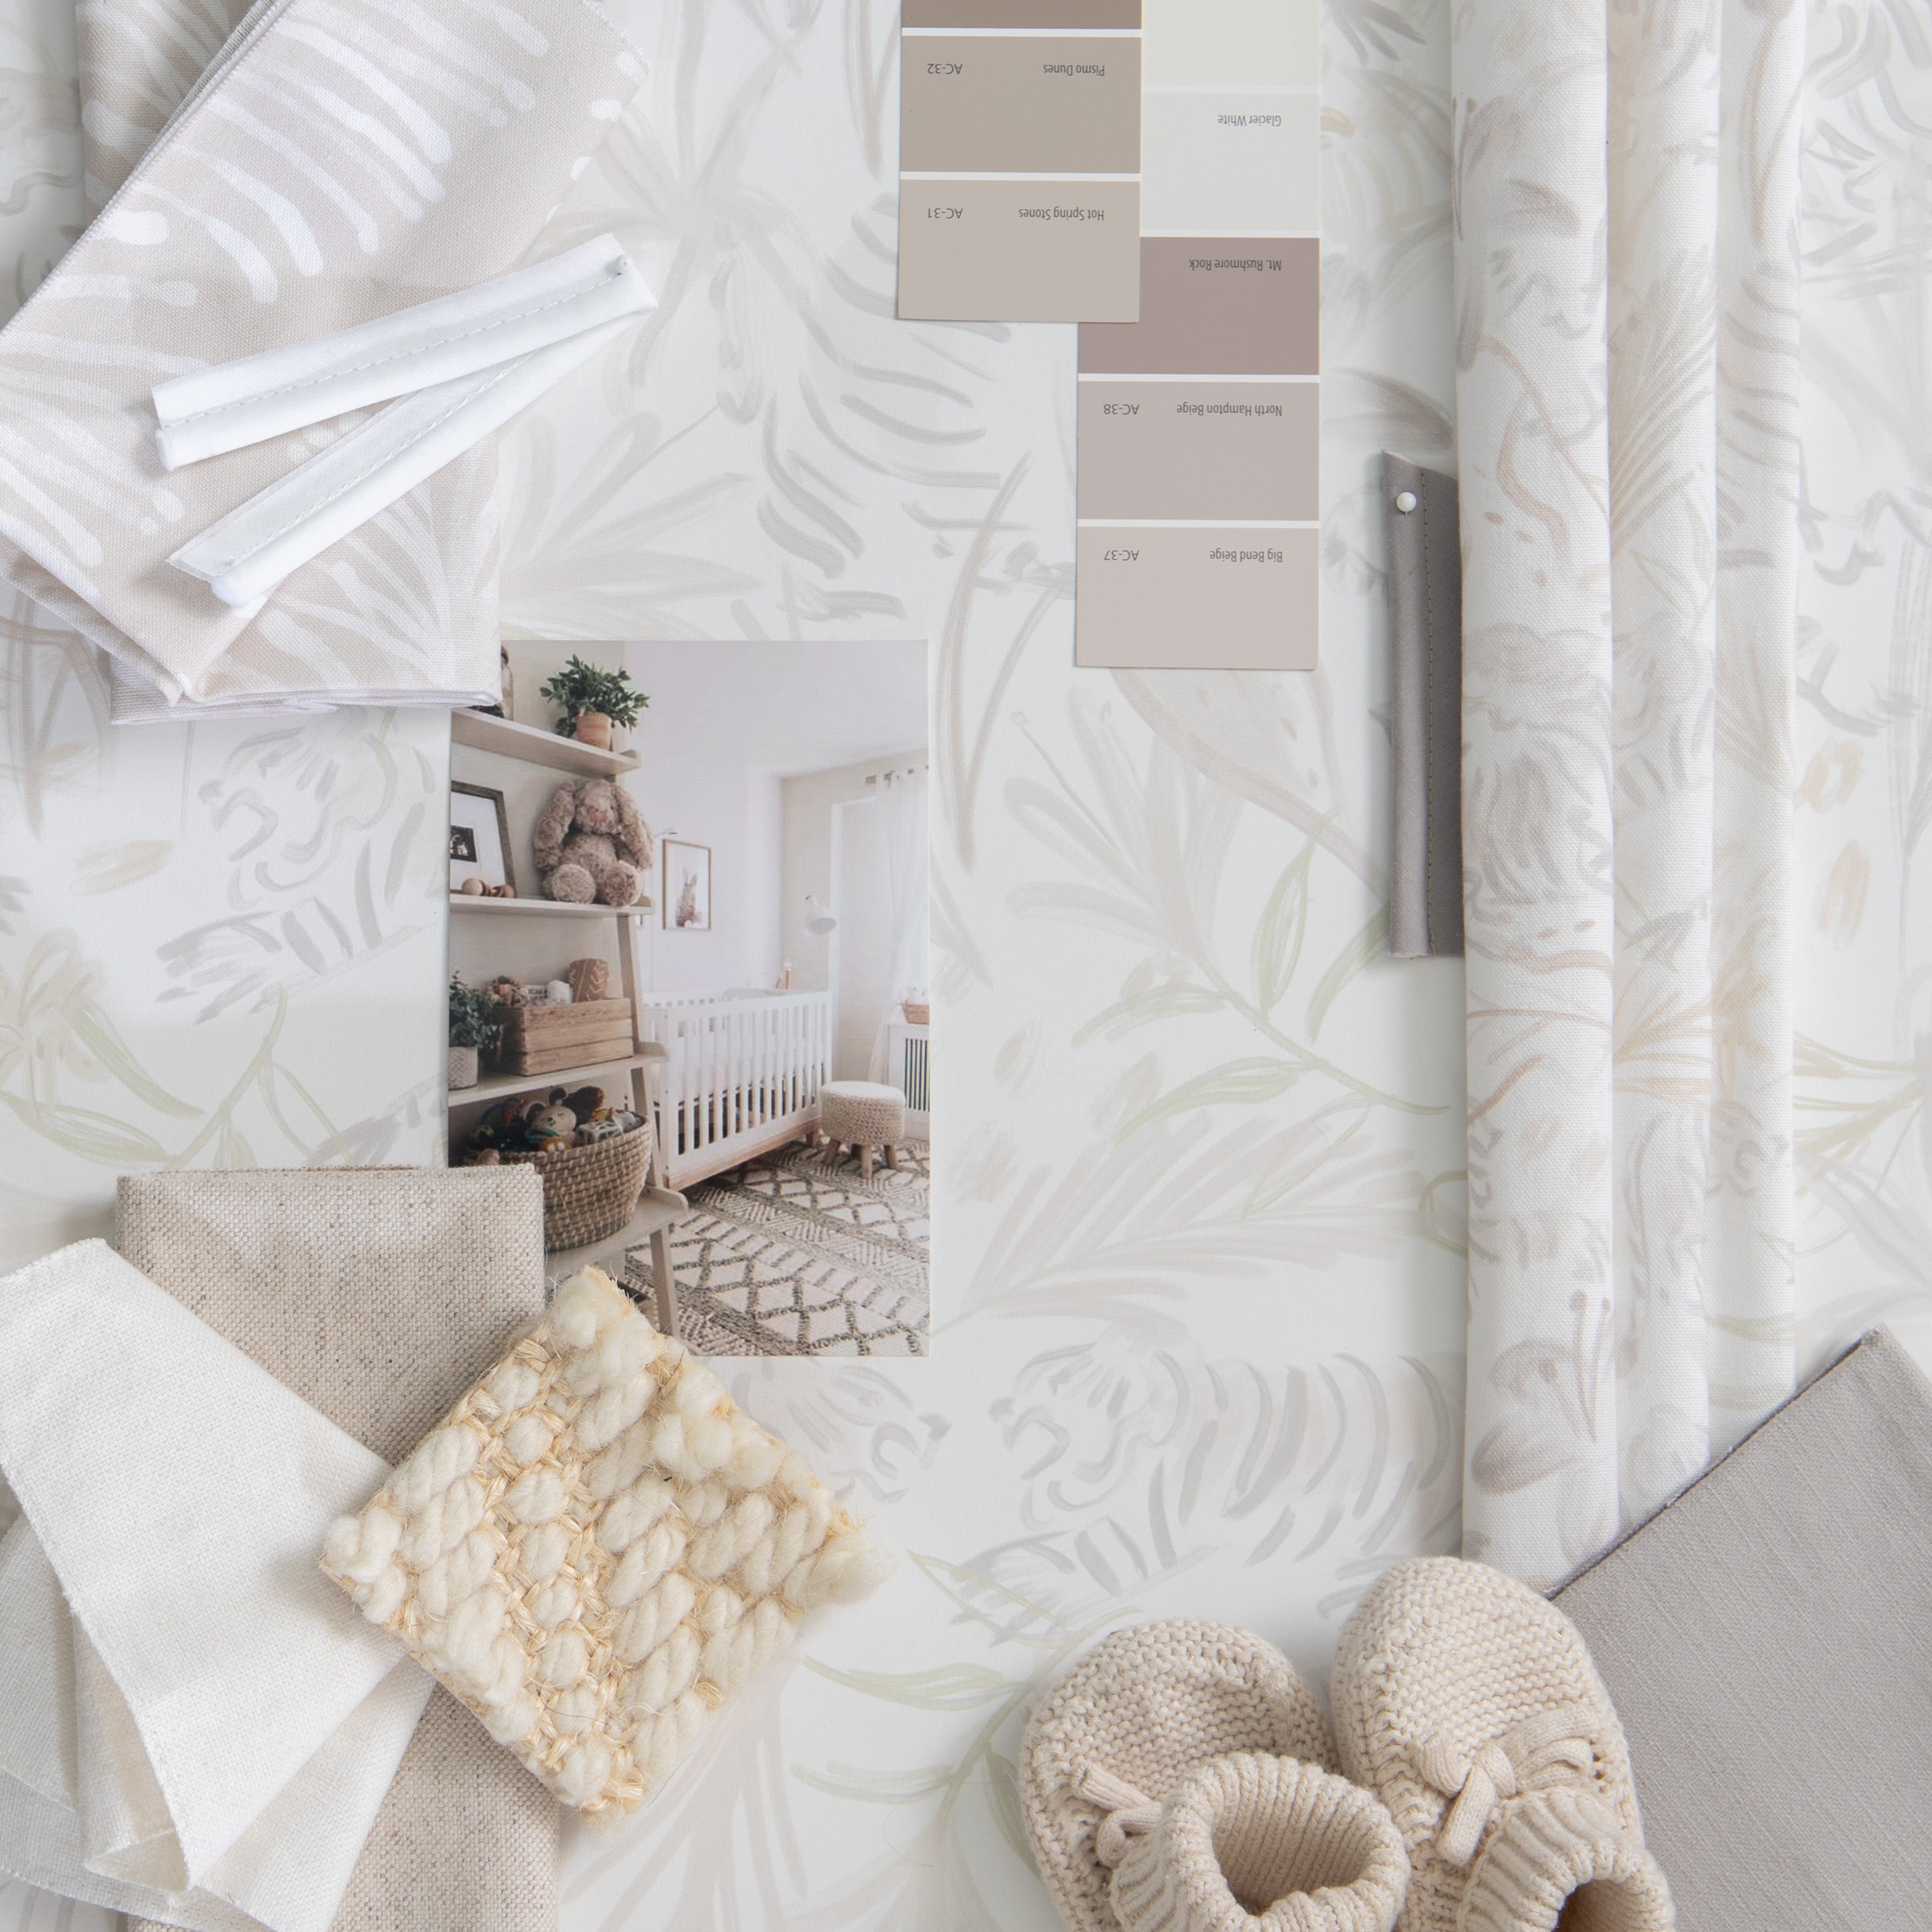 Interior design moodboard and fabric inspirations with Beige Botanical Stripe Printed Swatch, Oat Linen Swatch, and Beige Chinoiserie Tiger Printed Swatch